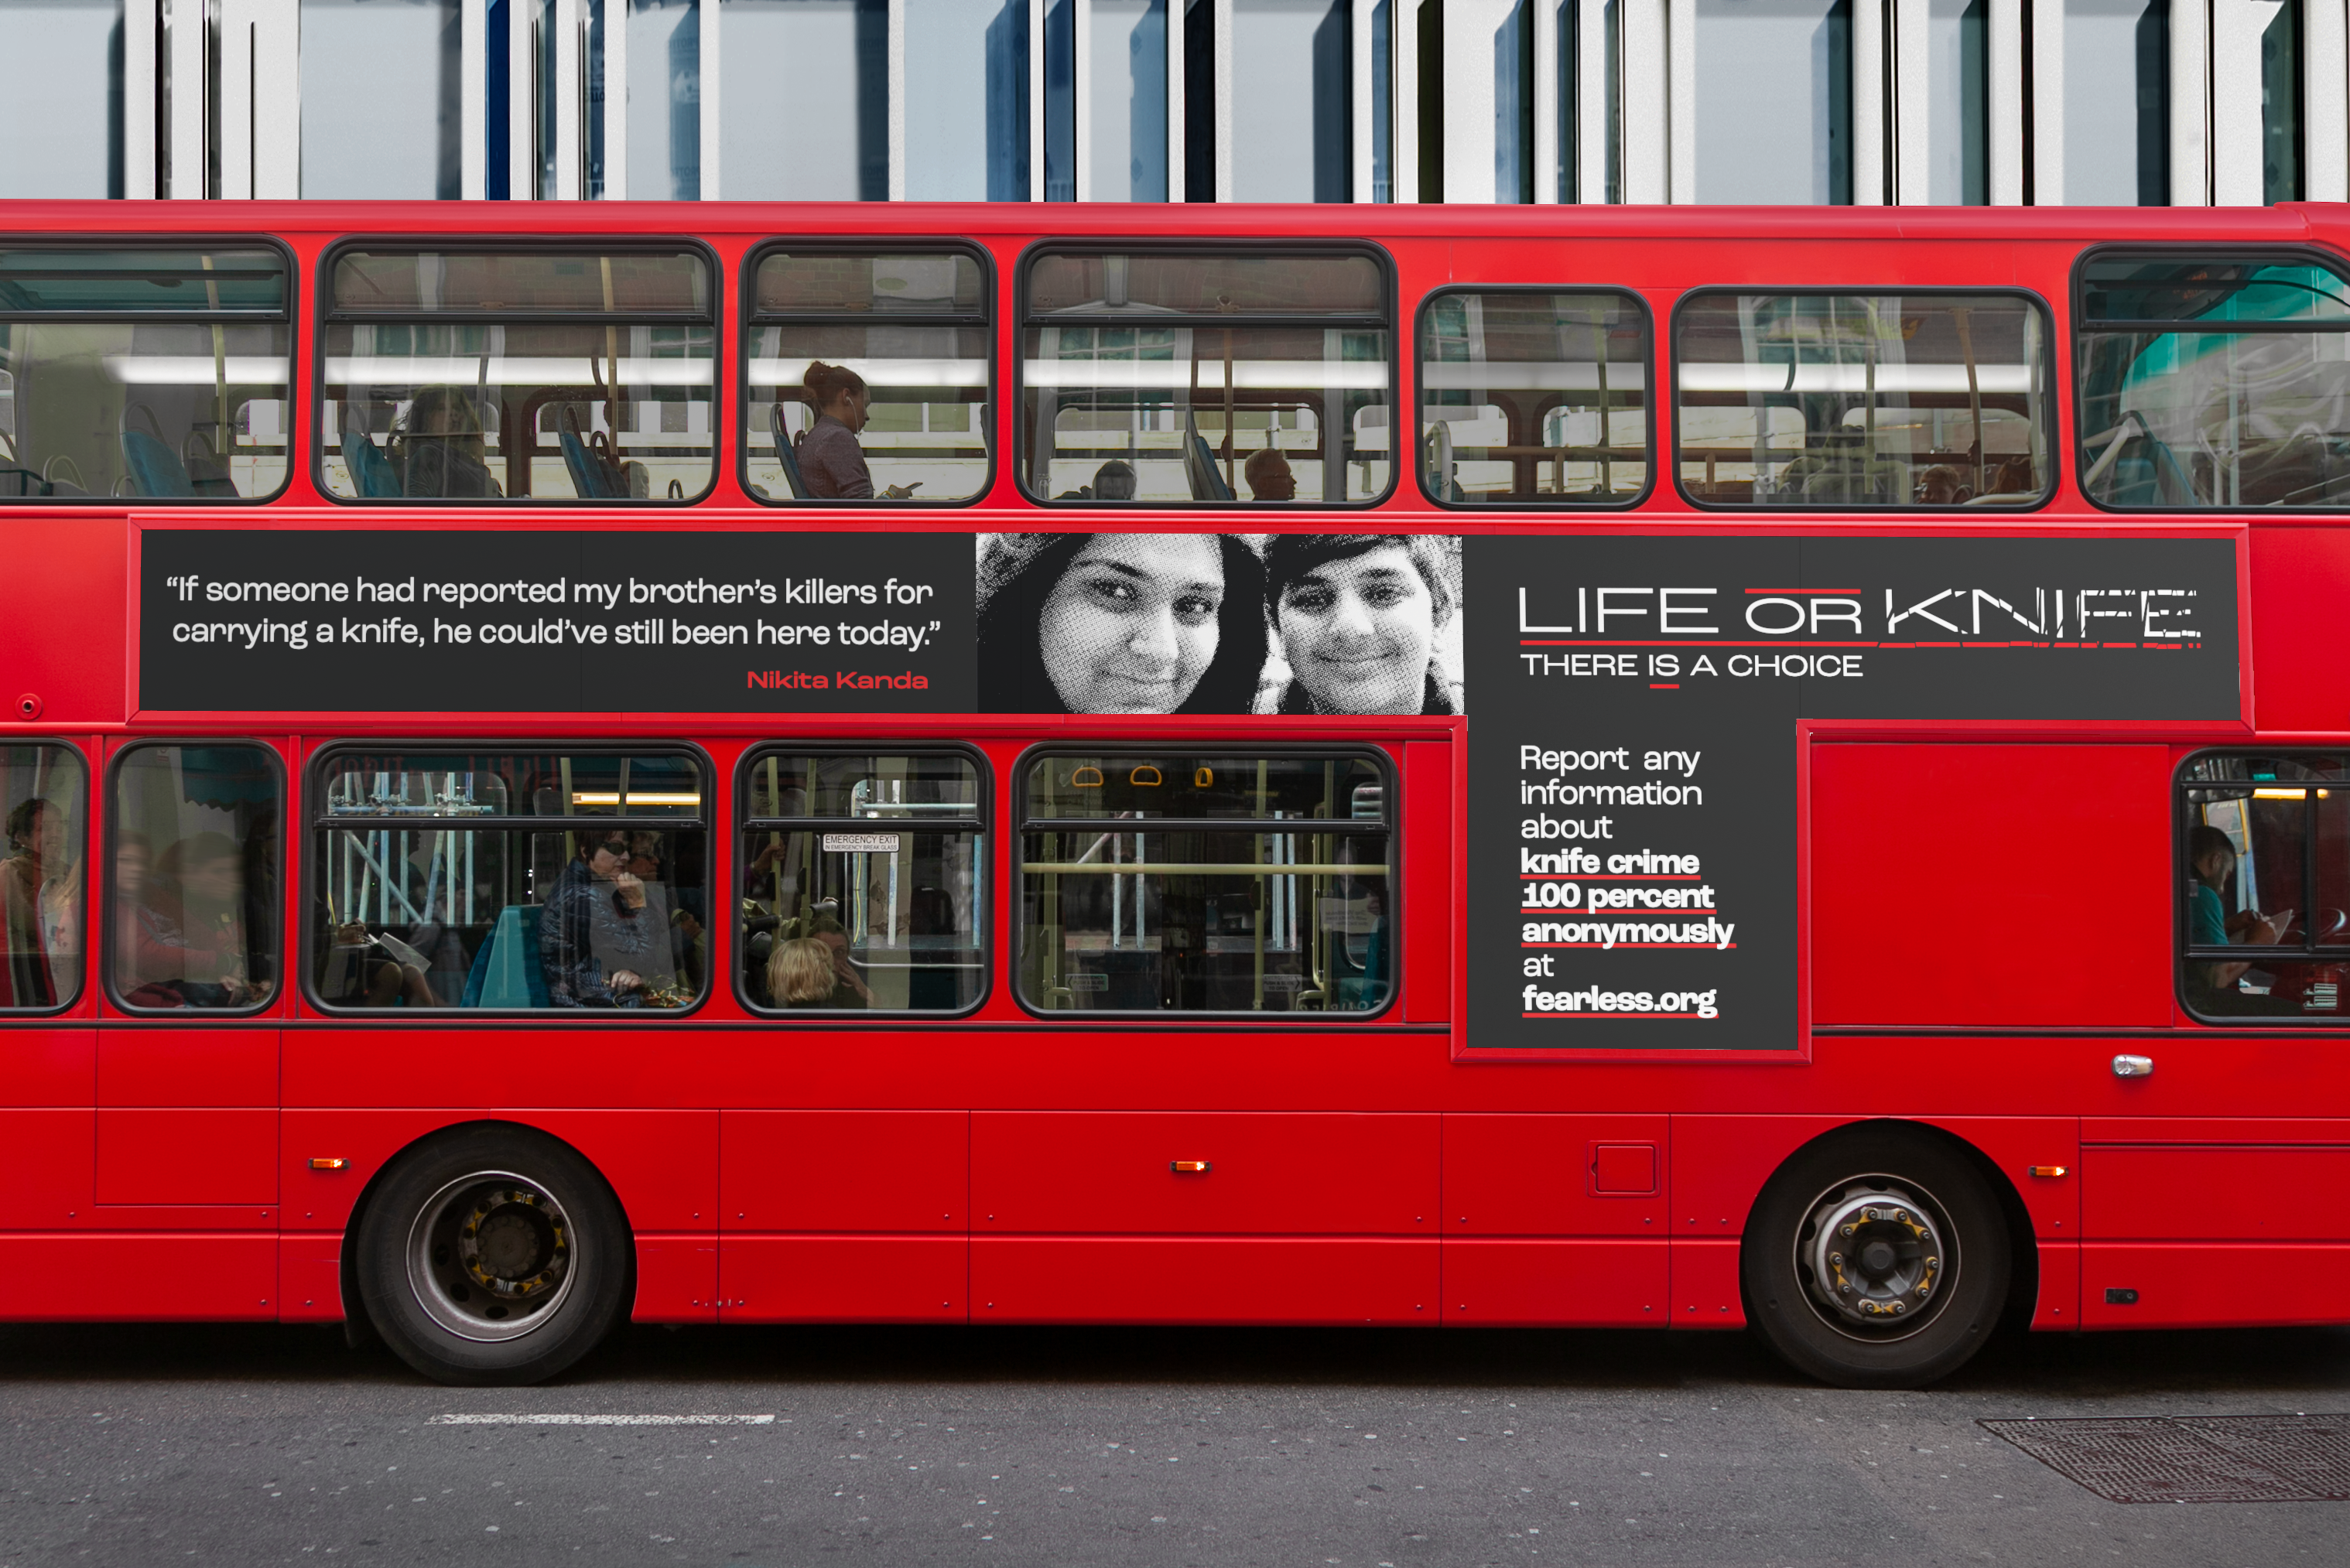 Side-on image of a red double-decker bus featuring an image of Nikita and Ronan Kanda, along with a quote from Nikita and a large call-to-action to prompt anonymous crime reporting